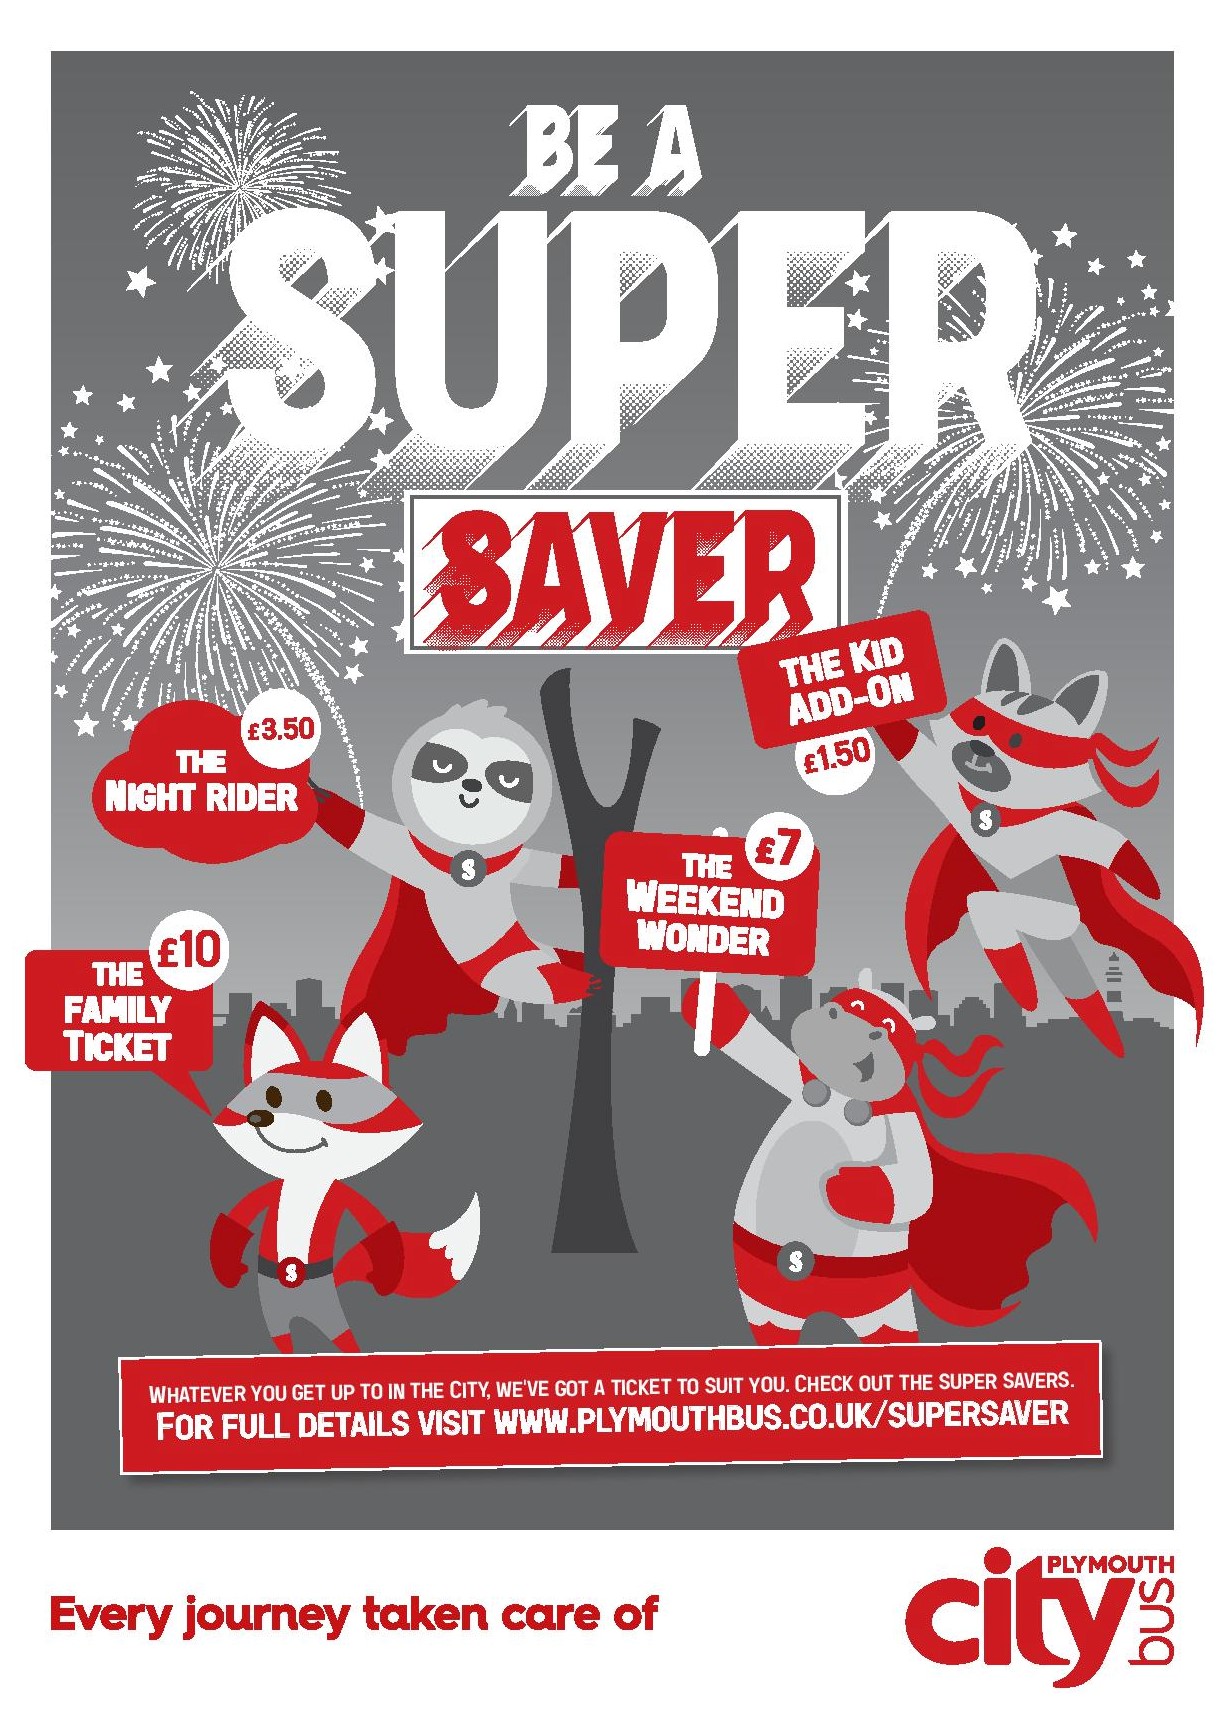 Super Saver poster with ticket and fare information